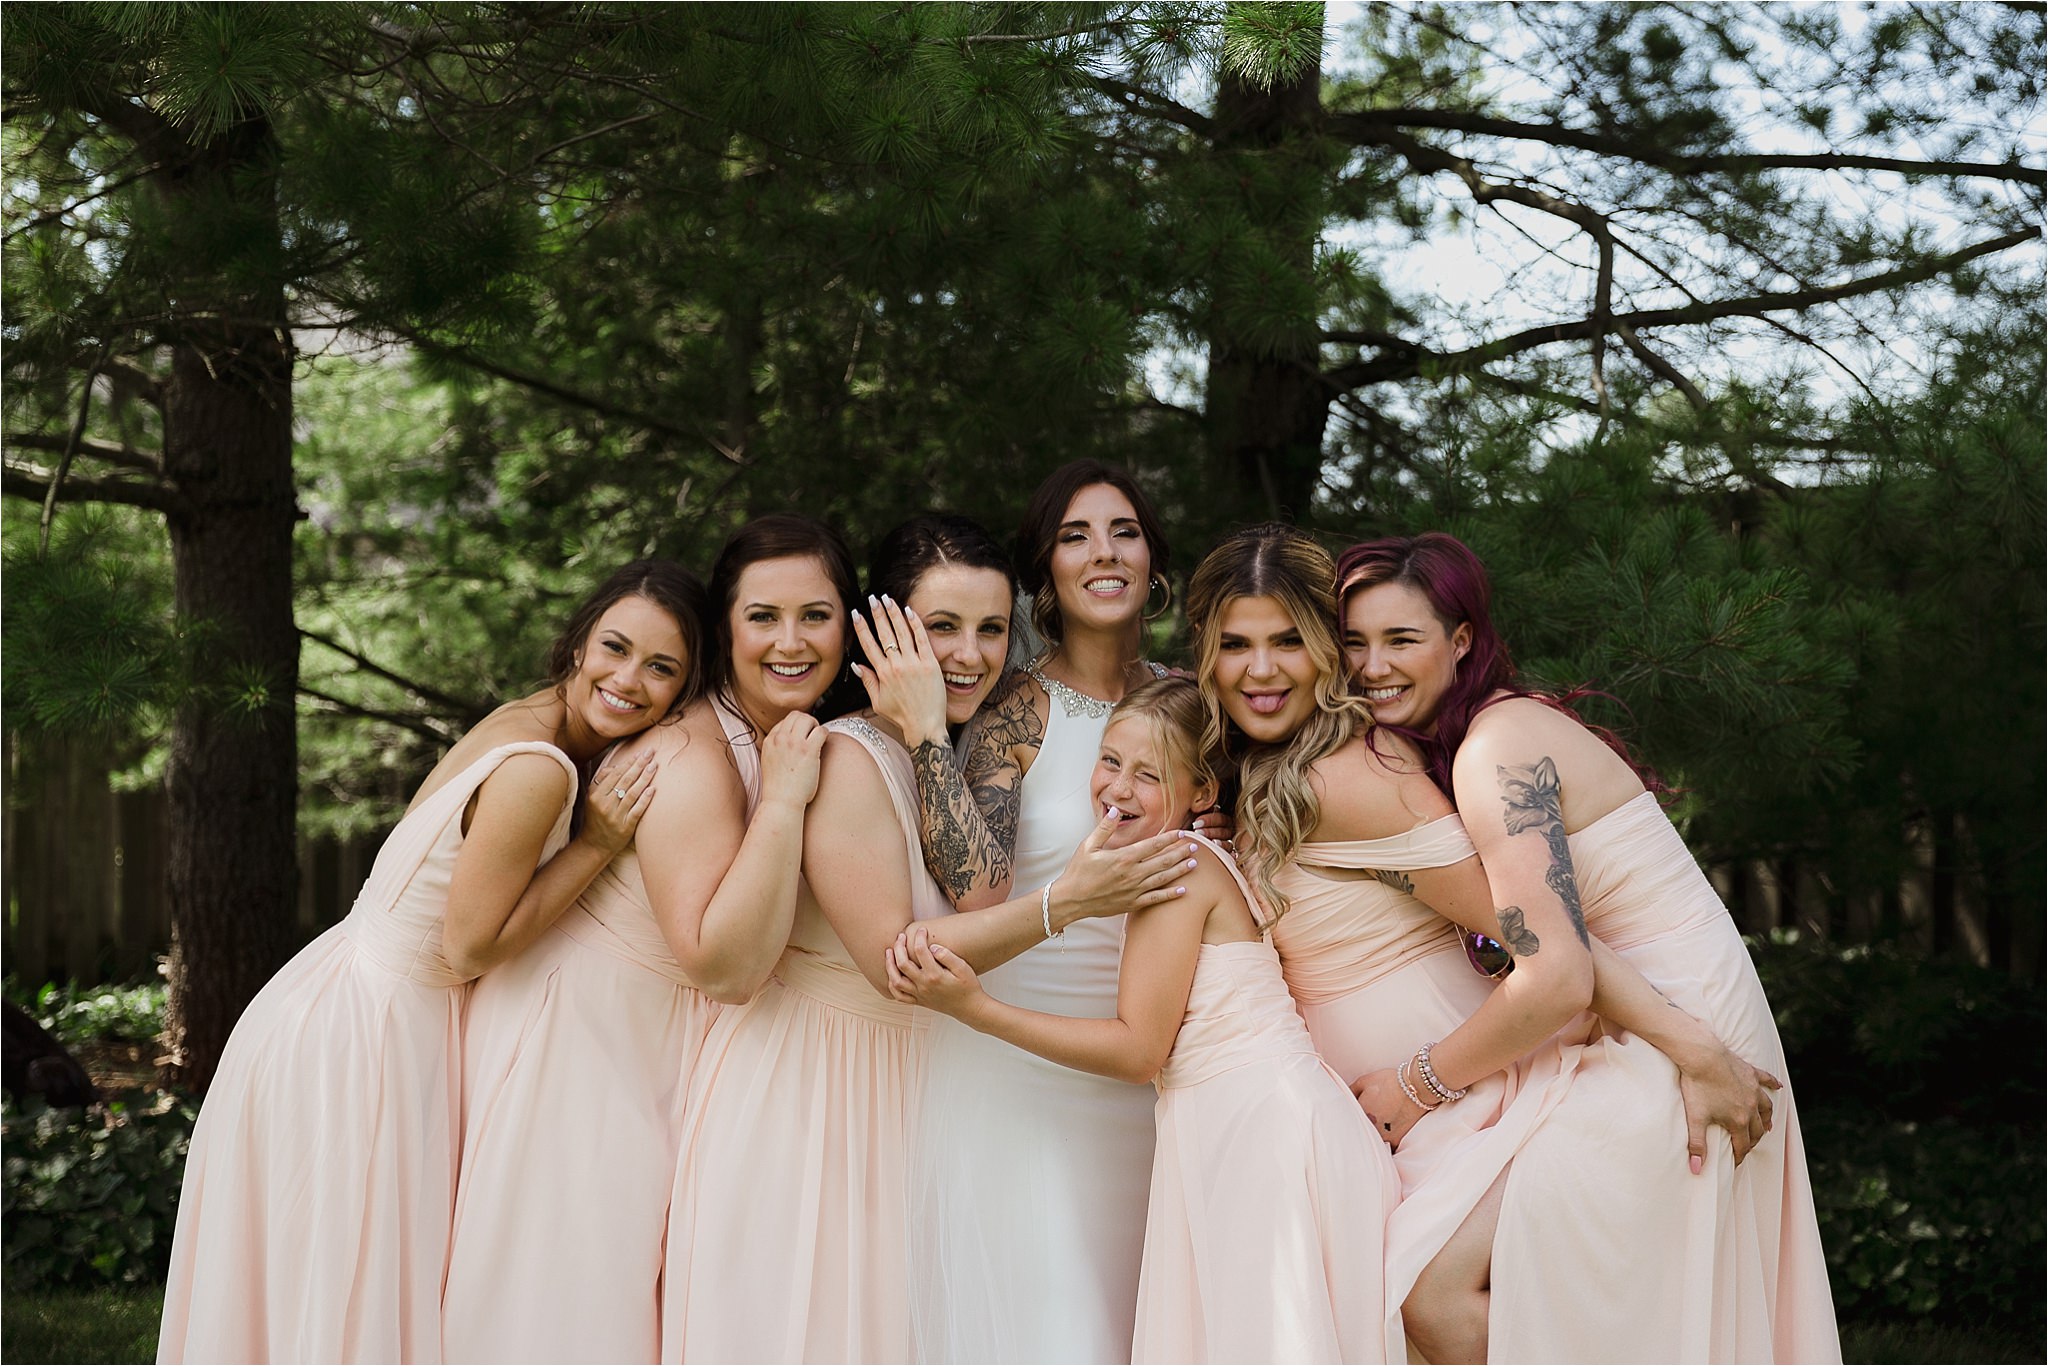 Bride with bridesmaids outside in long blush dresses